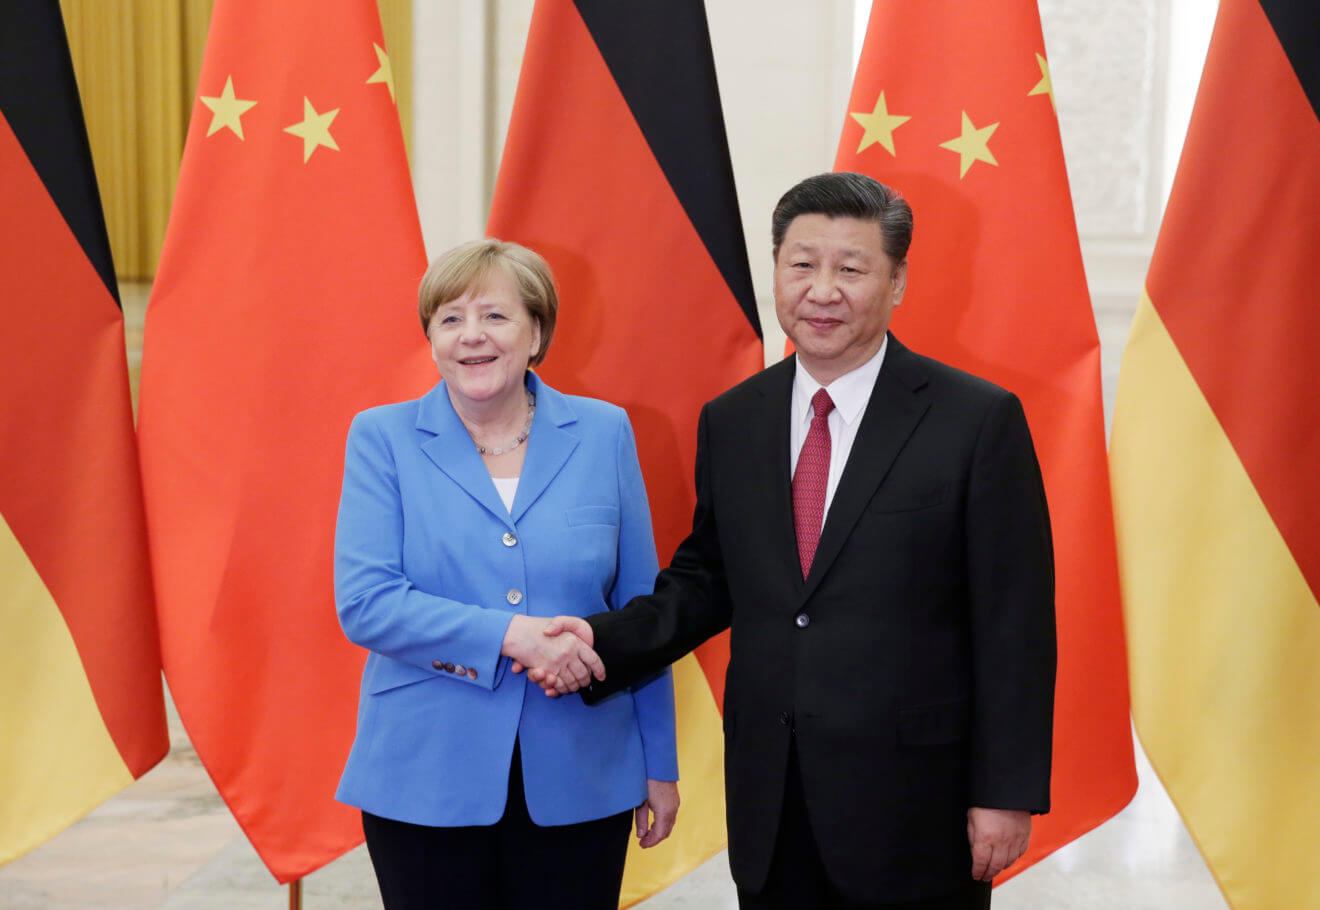 German Chancellor Merkel Warns Against Severing All Ties With China Amid Growing Tensions